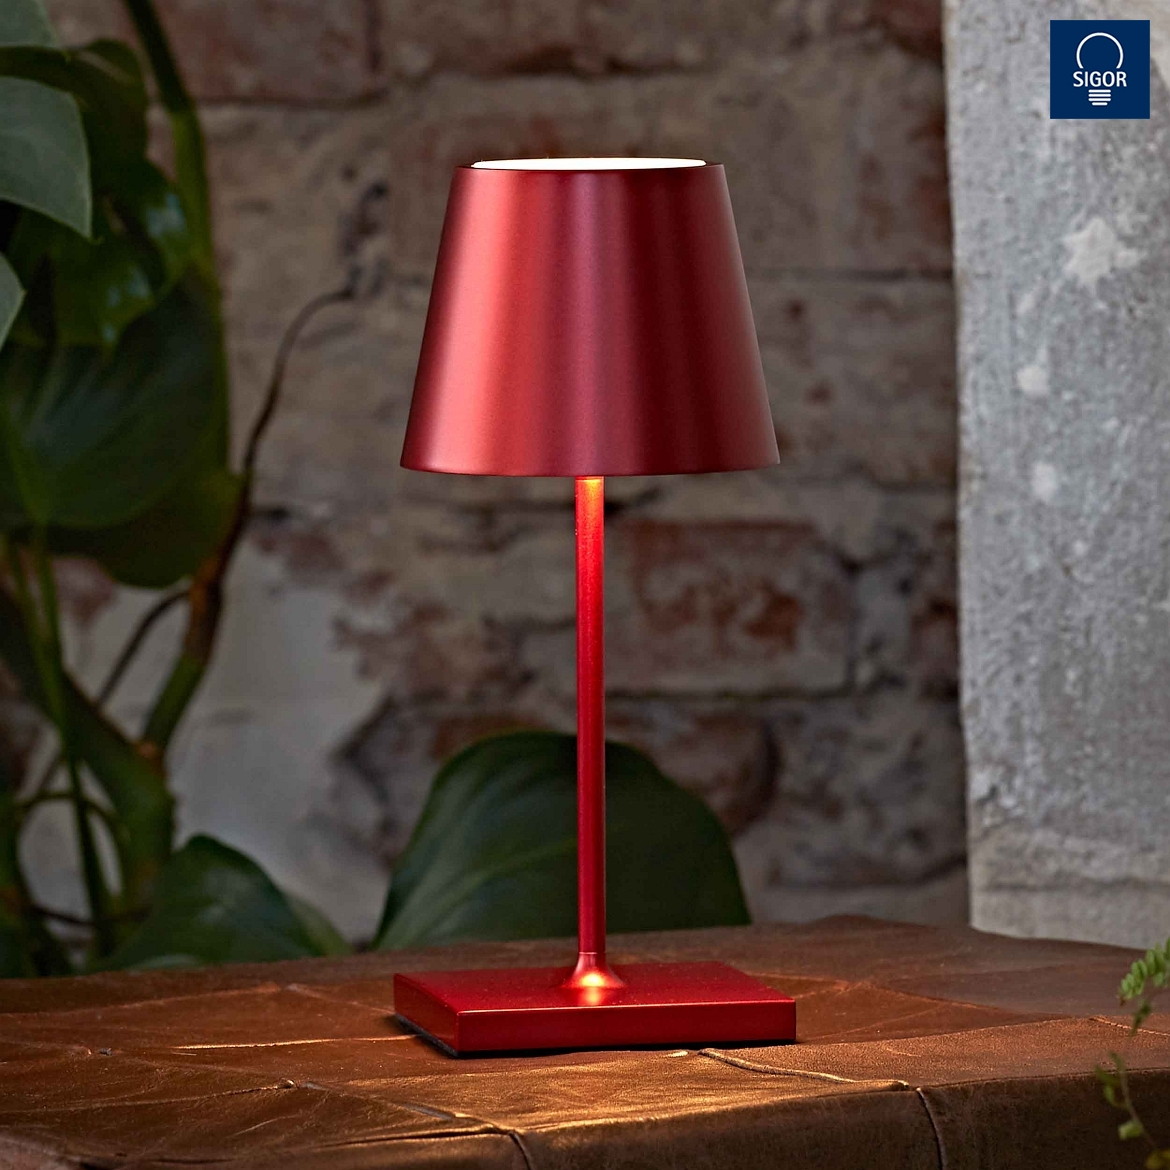 SIGOR LED battery table lamp NUINDIE MINI round, dimmable, IP54, cherry red, anodised